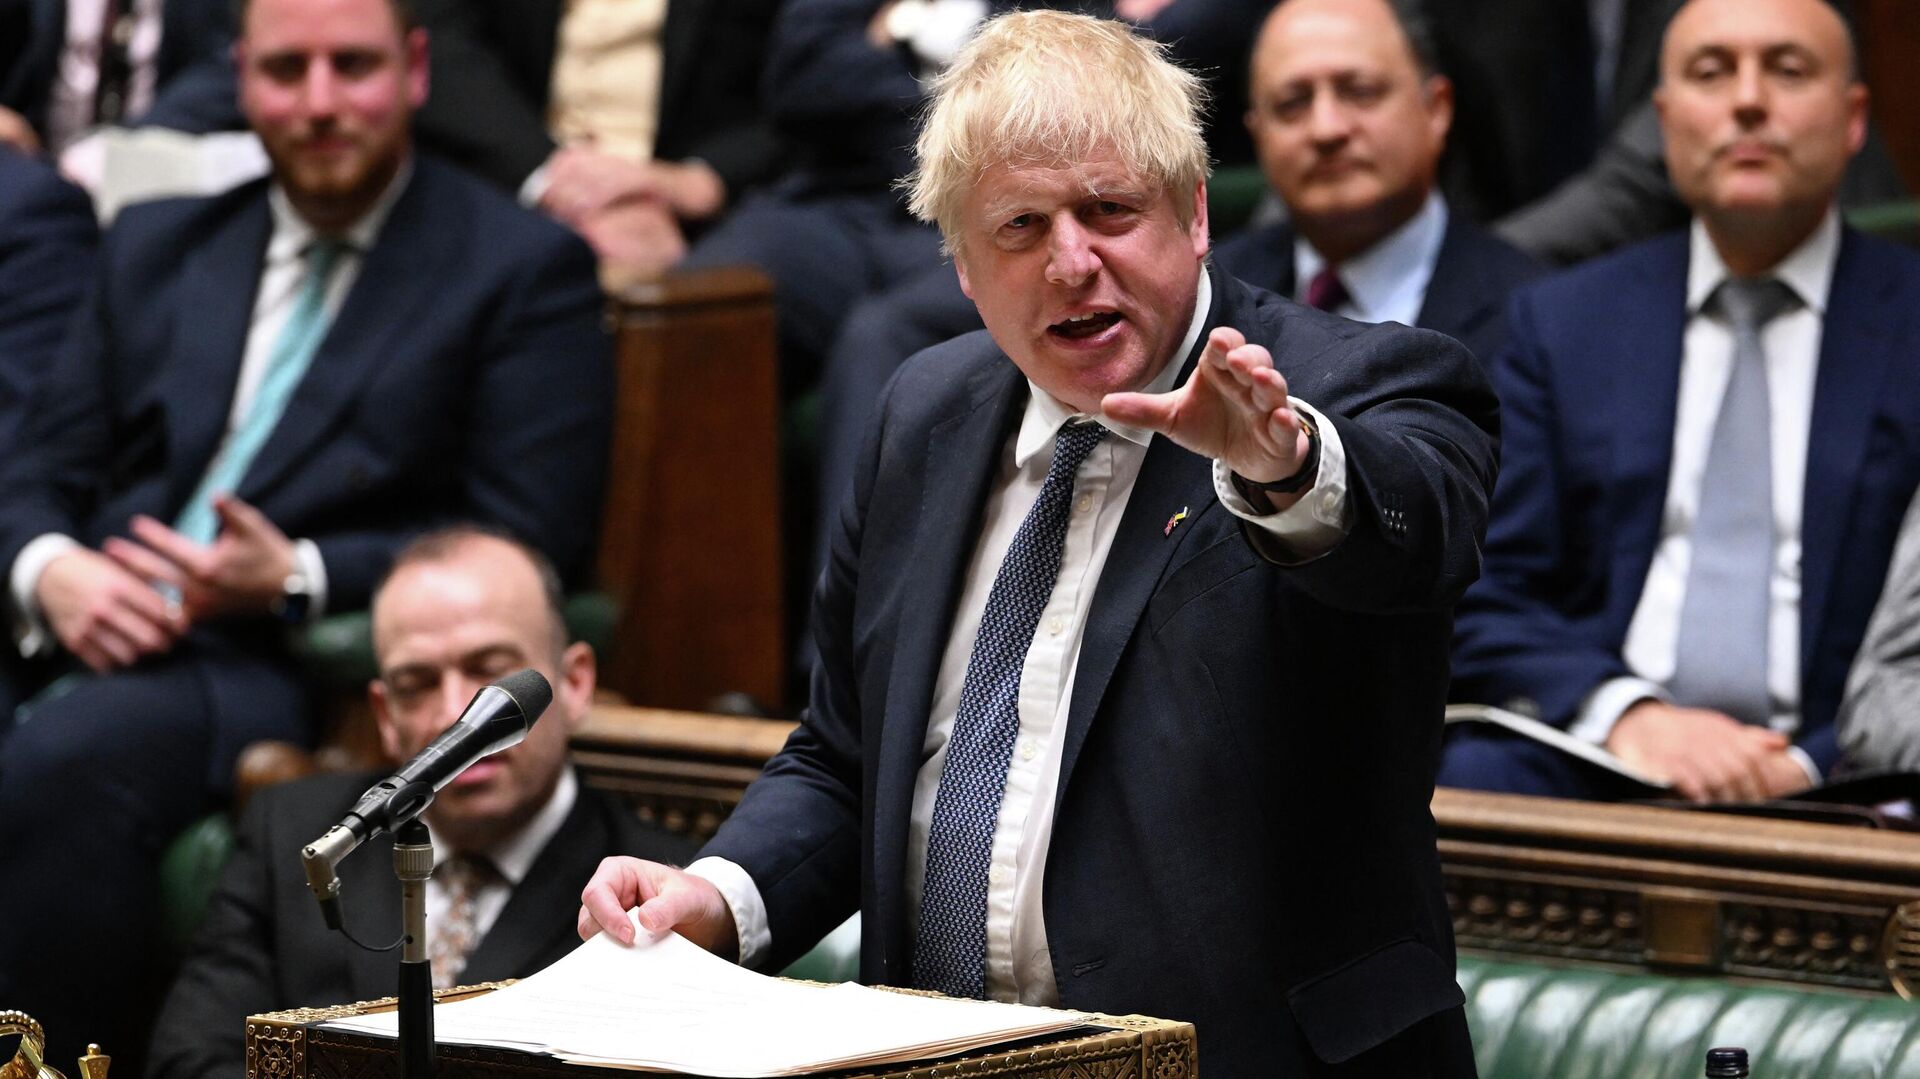 A handout photograph released by the UK Parliament shows Britain's Prime Minister Boris Johnson speaking during the first day of a debate on the Queen's Speech, in the House of Commons, in London, on May 10, 2022 - Sputnik International, 1920, 31.05.2022